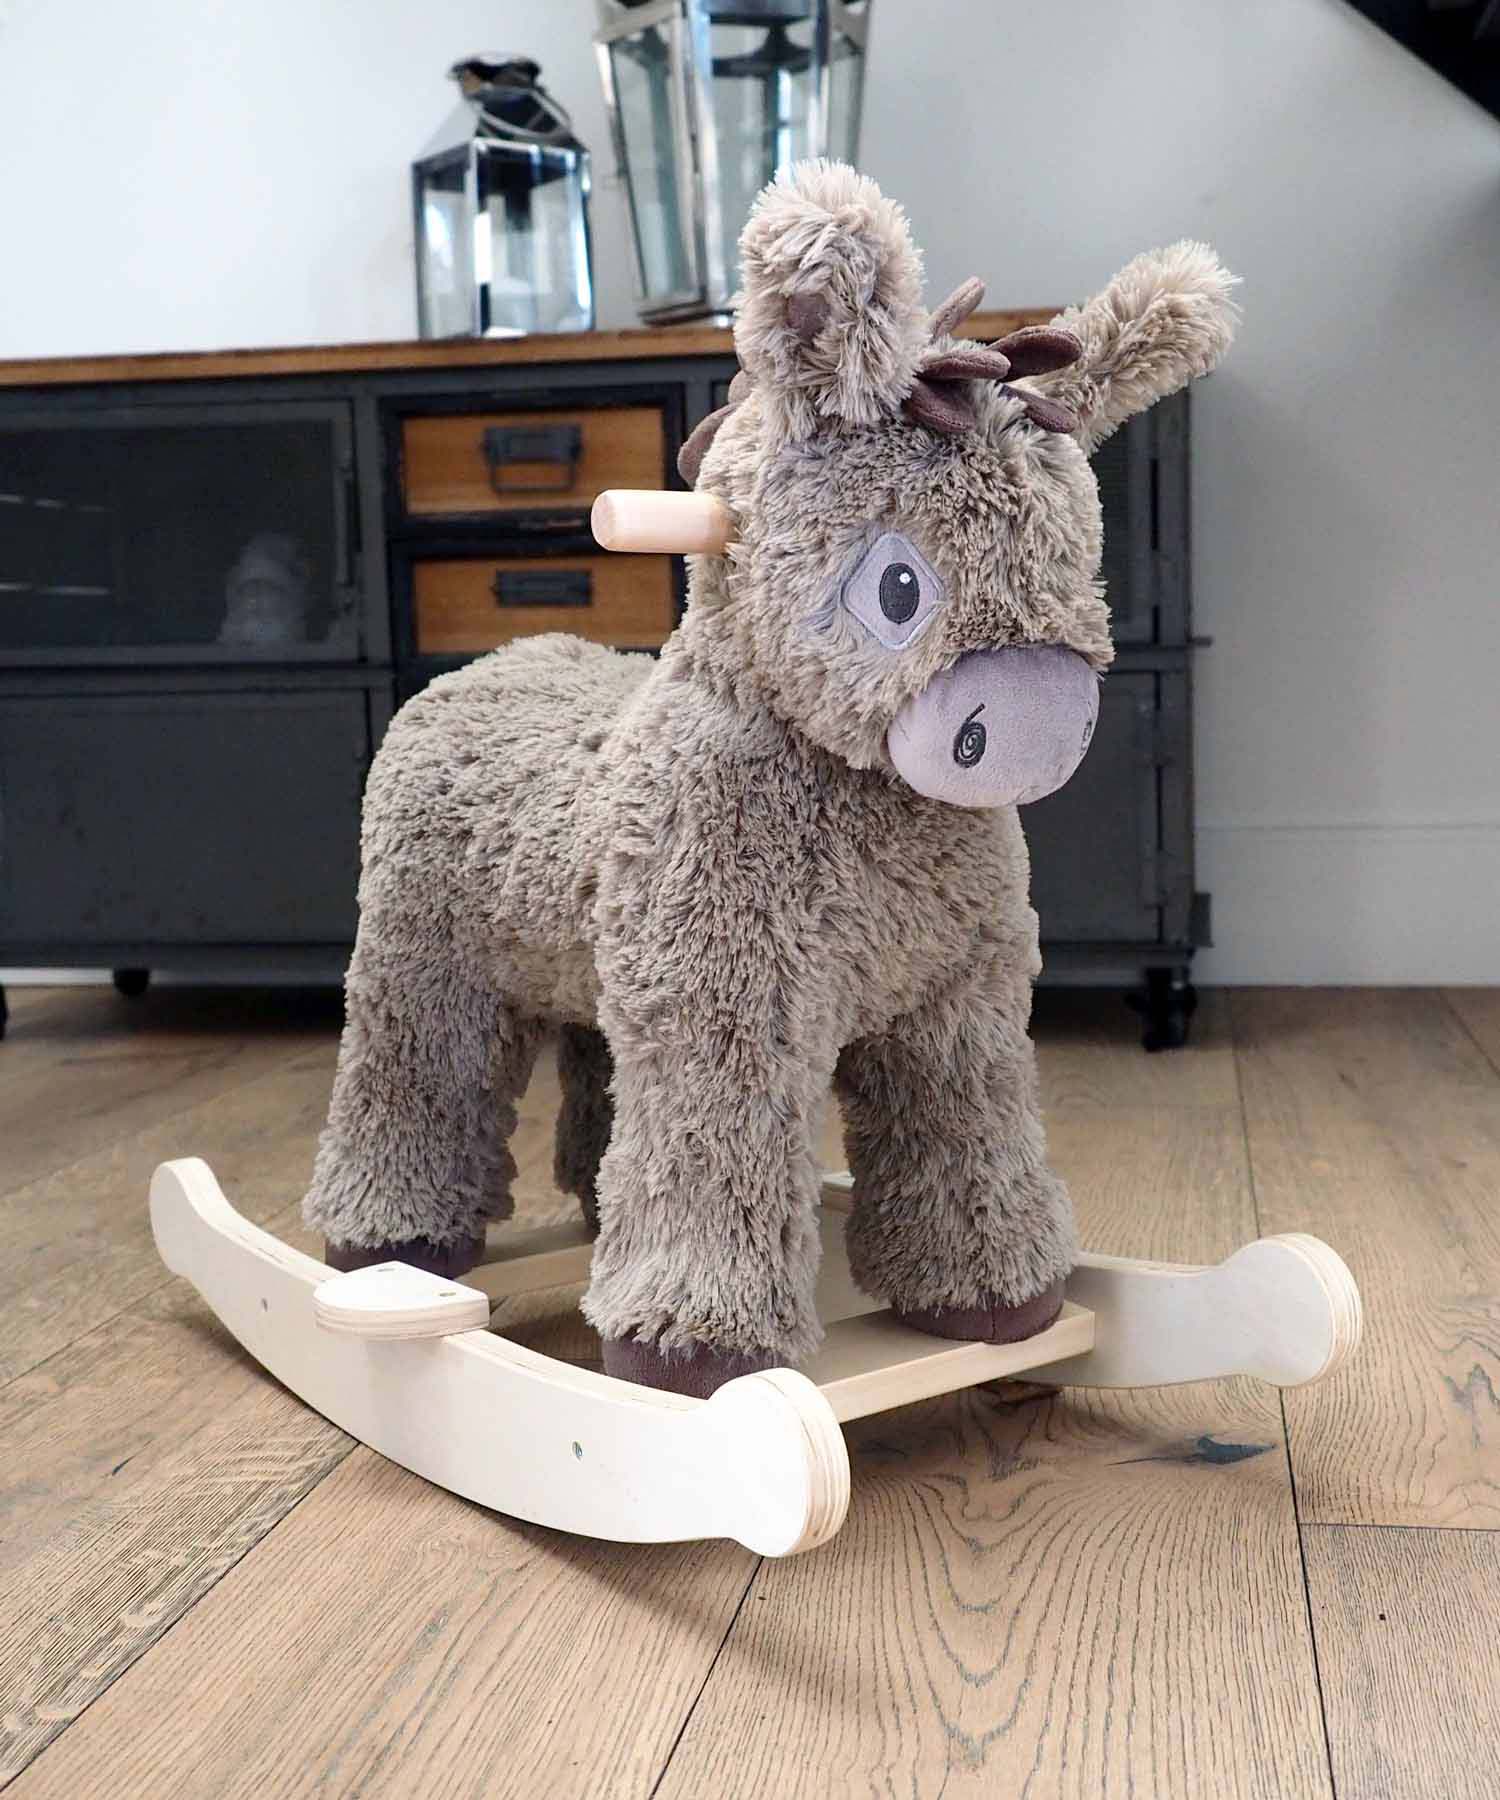 Norbert Rocking Donkey Animal for 9 months old